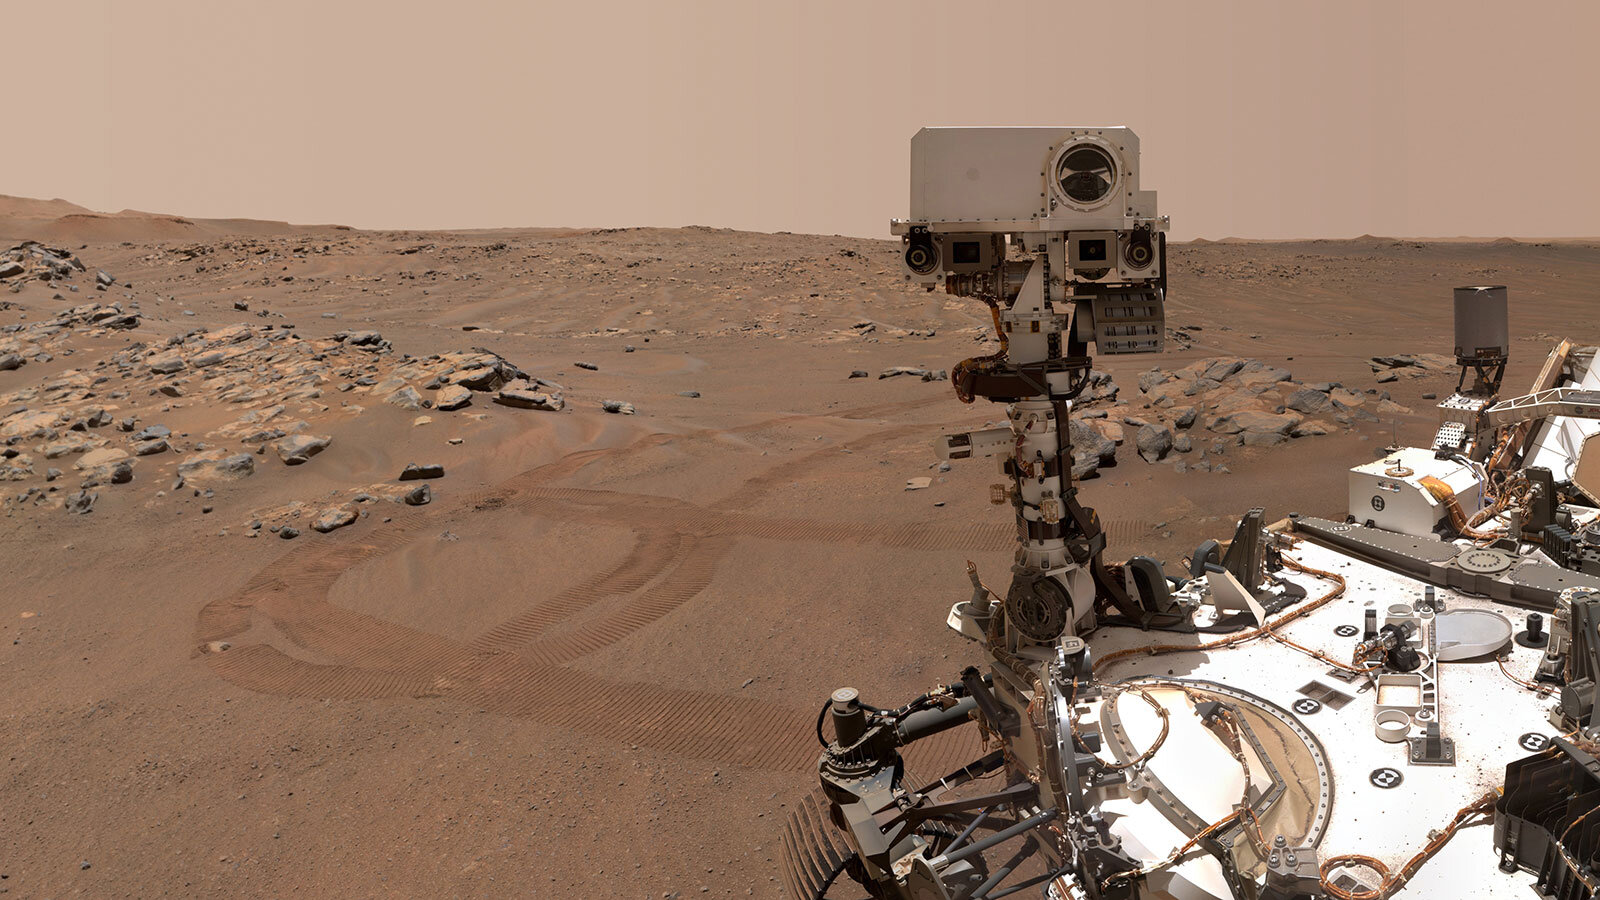 #New research sheds light on when Mars may have had water